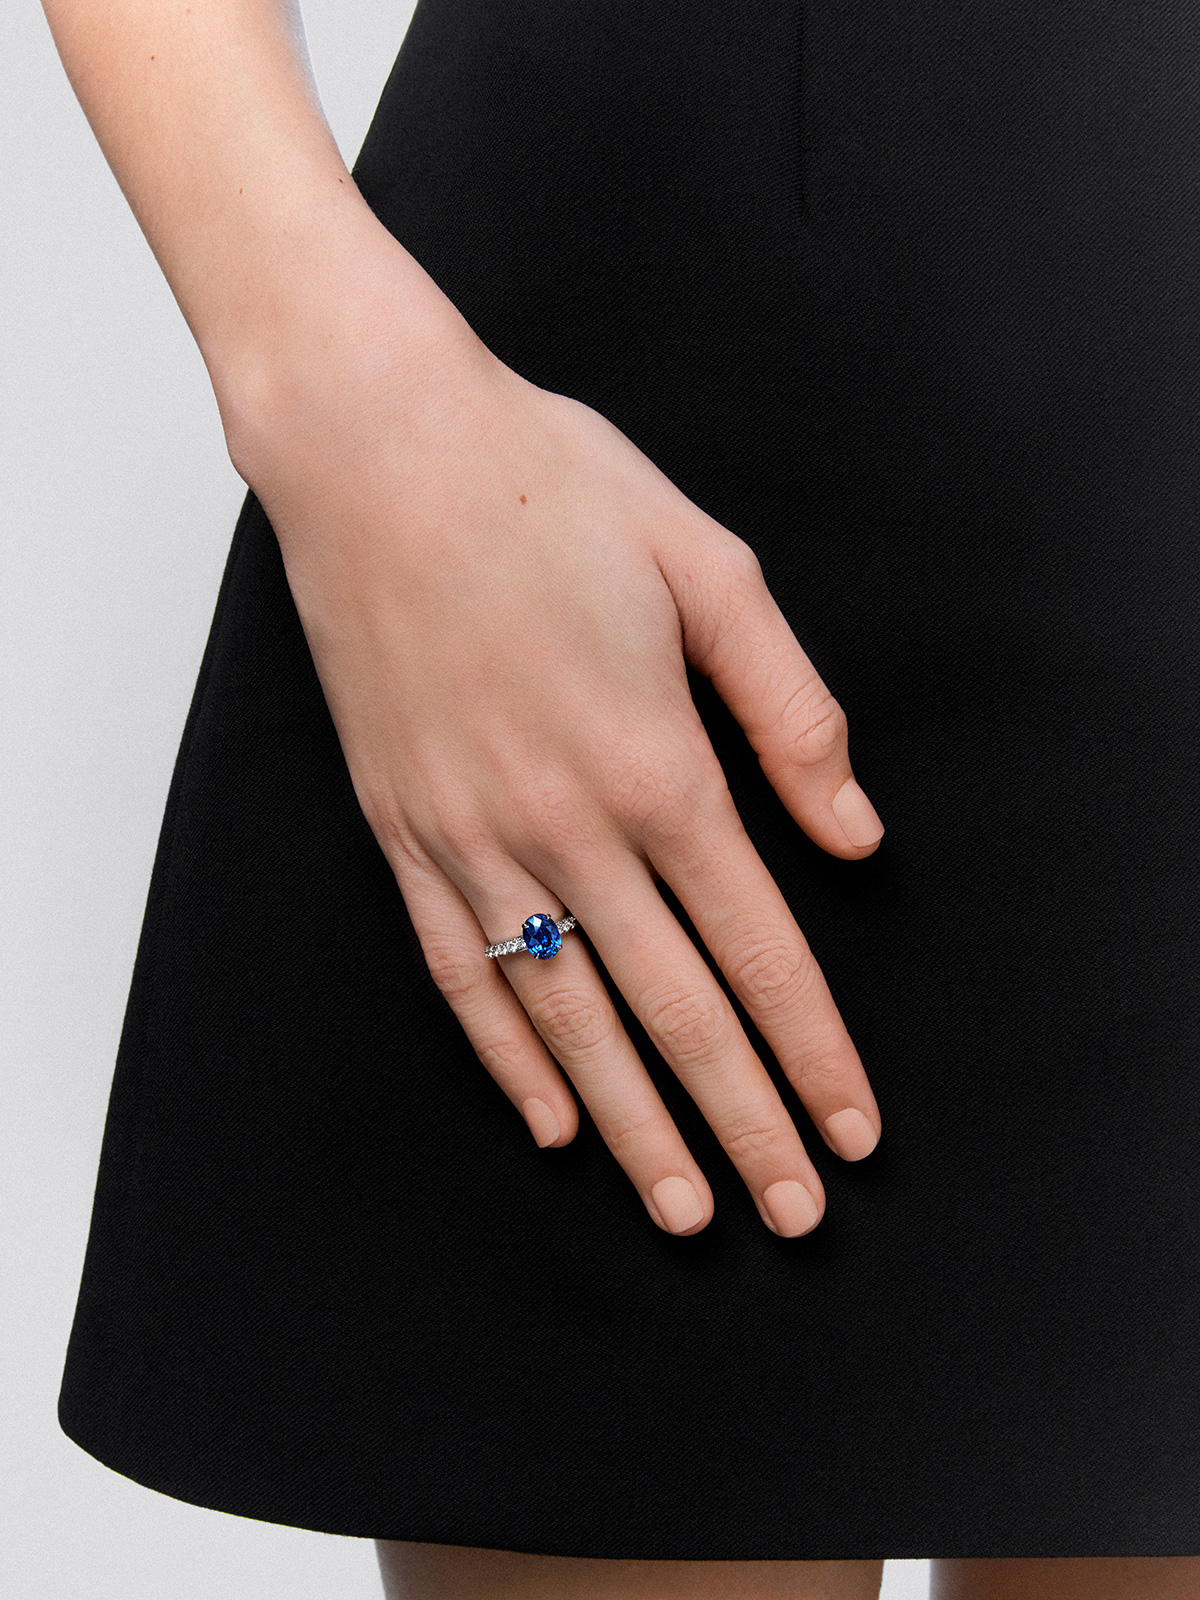 18K White Gold Ring with Royal Blue Zafiro in 0.13 cts oval size